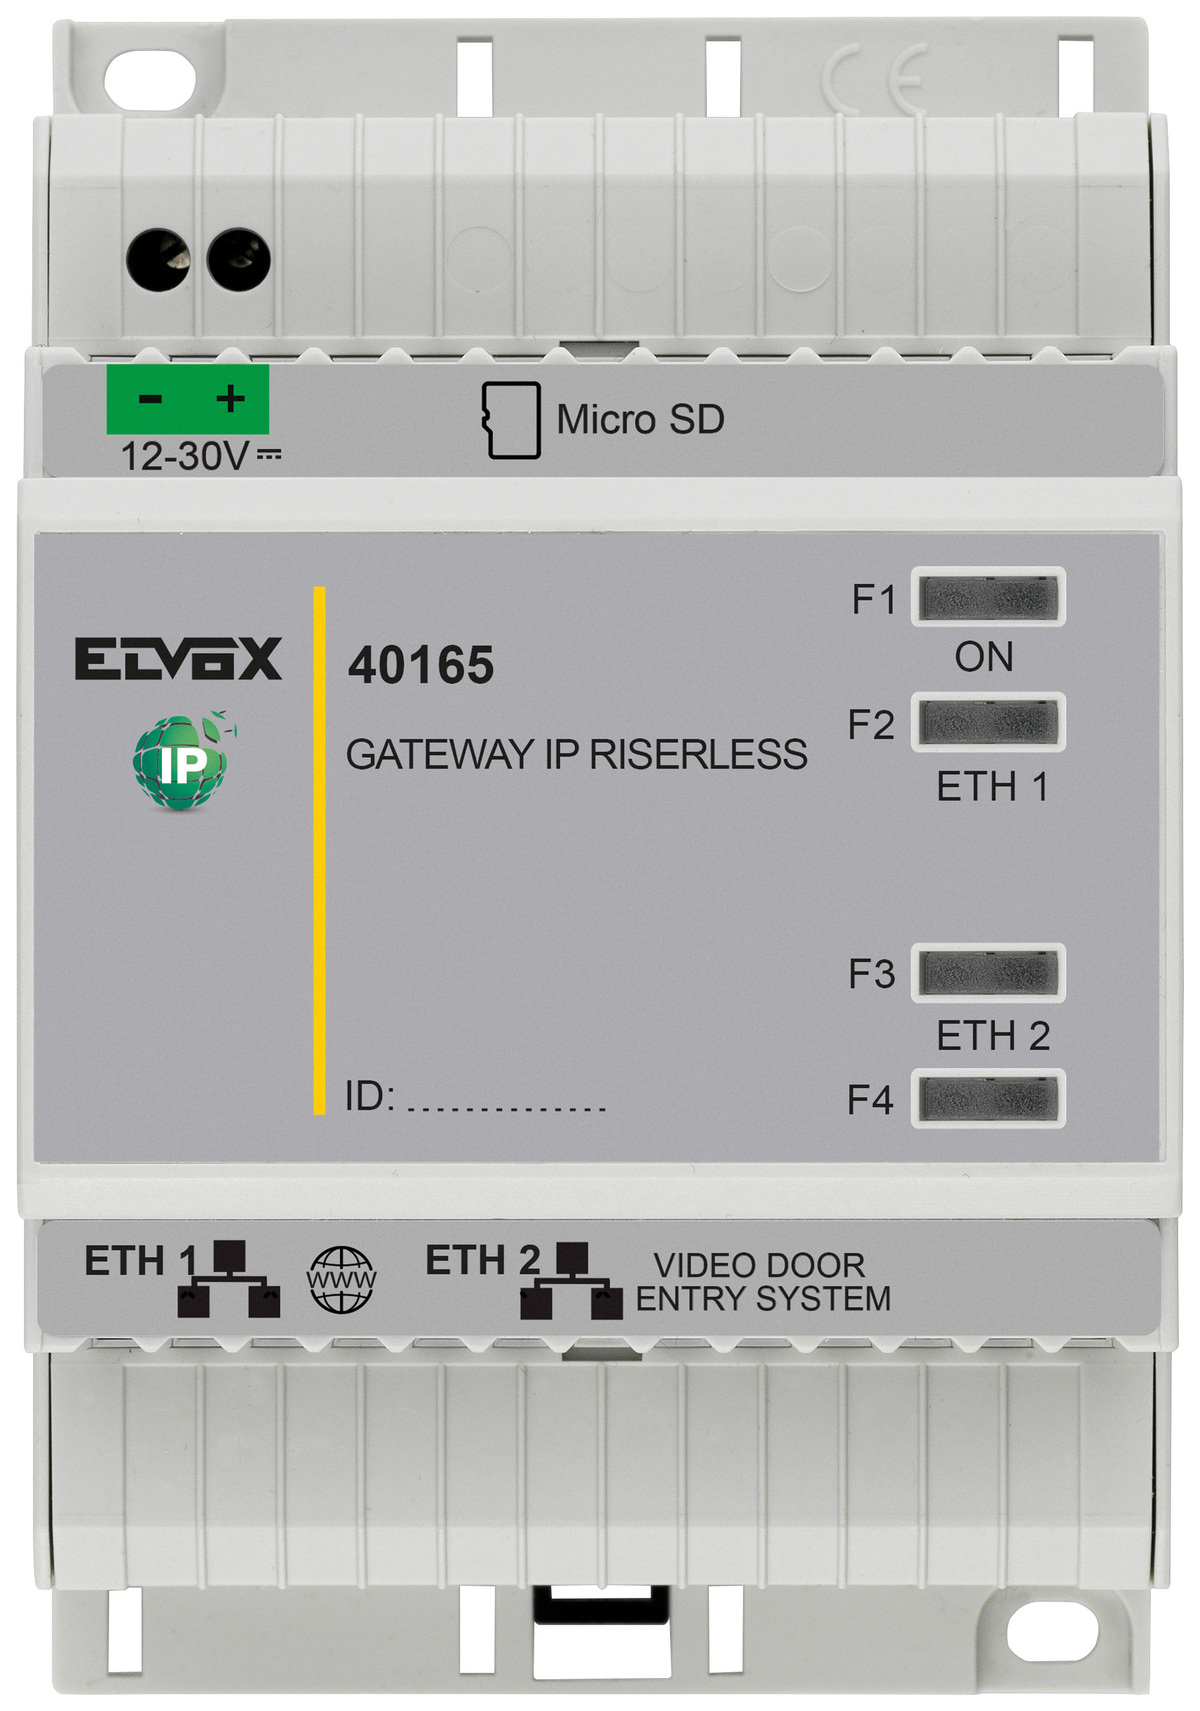 ELVOX IP INT RISERLESS IP GATEWAY FOR UP TO 100 APT MAX 16 IN ONE SYSTEM ( 1600 APT) 5 CONCURRENT CALLS (2.5Mbps EACH) 4 DIN MOD 12-30VDC 109.8Hx71.8Wx60D * REQUIRES LICENCE*